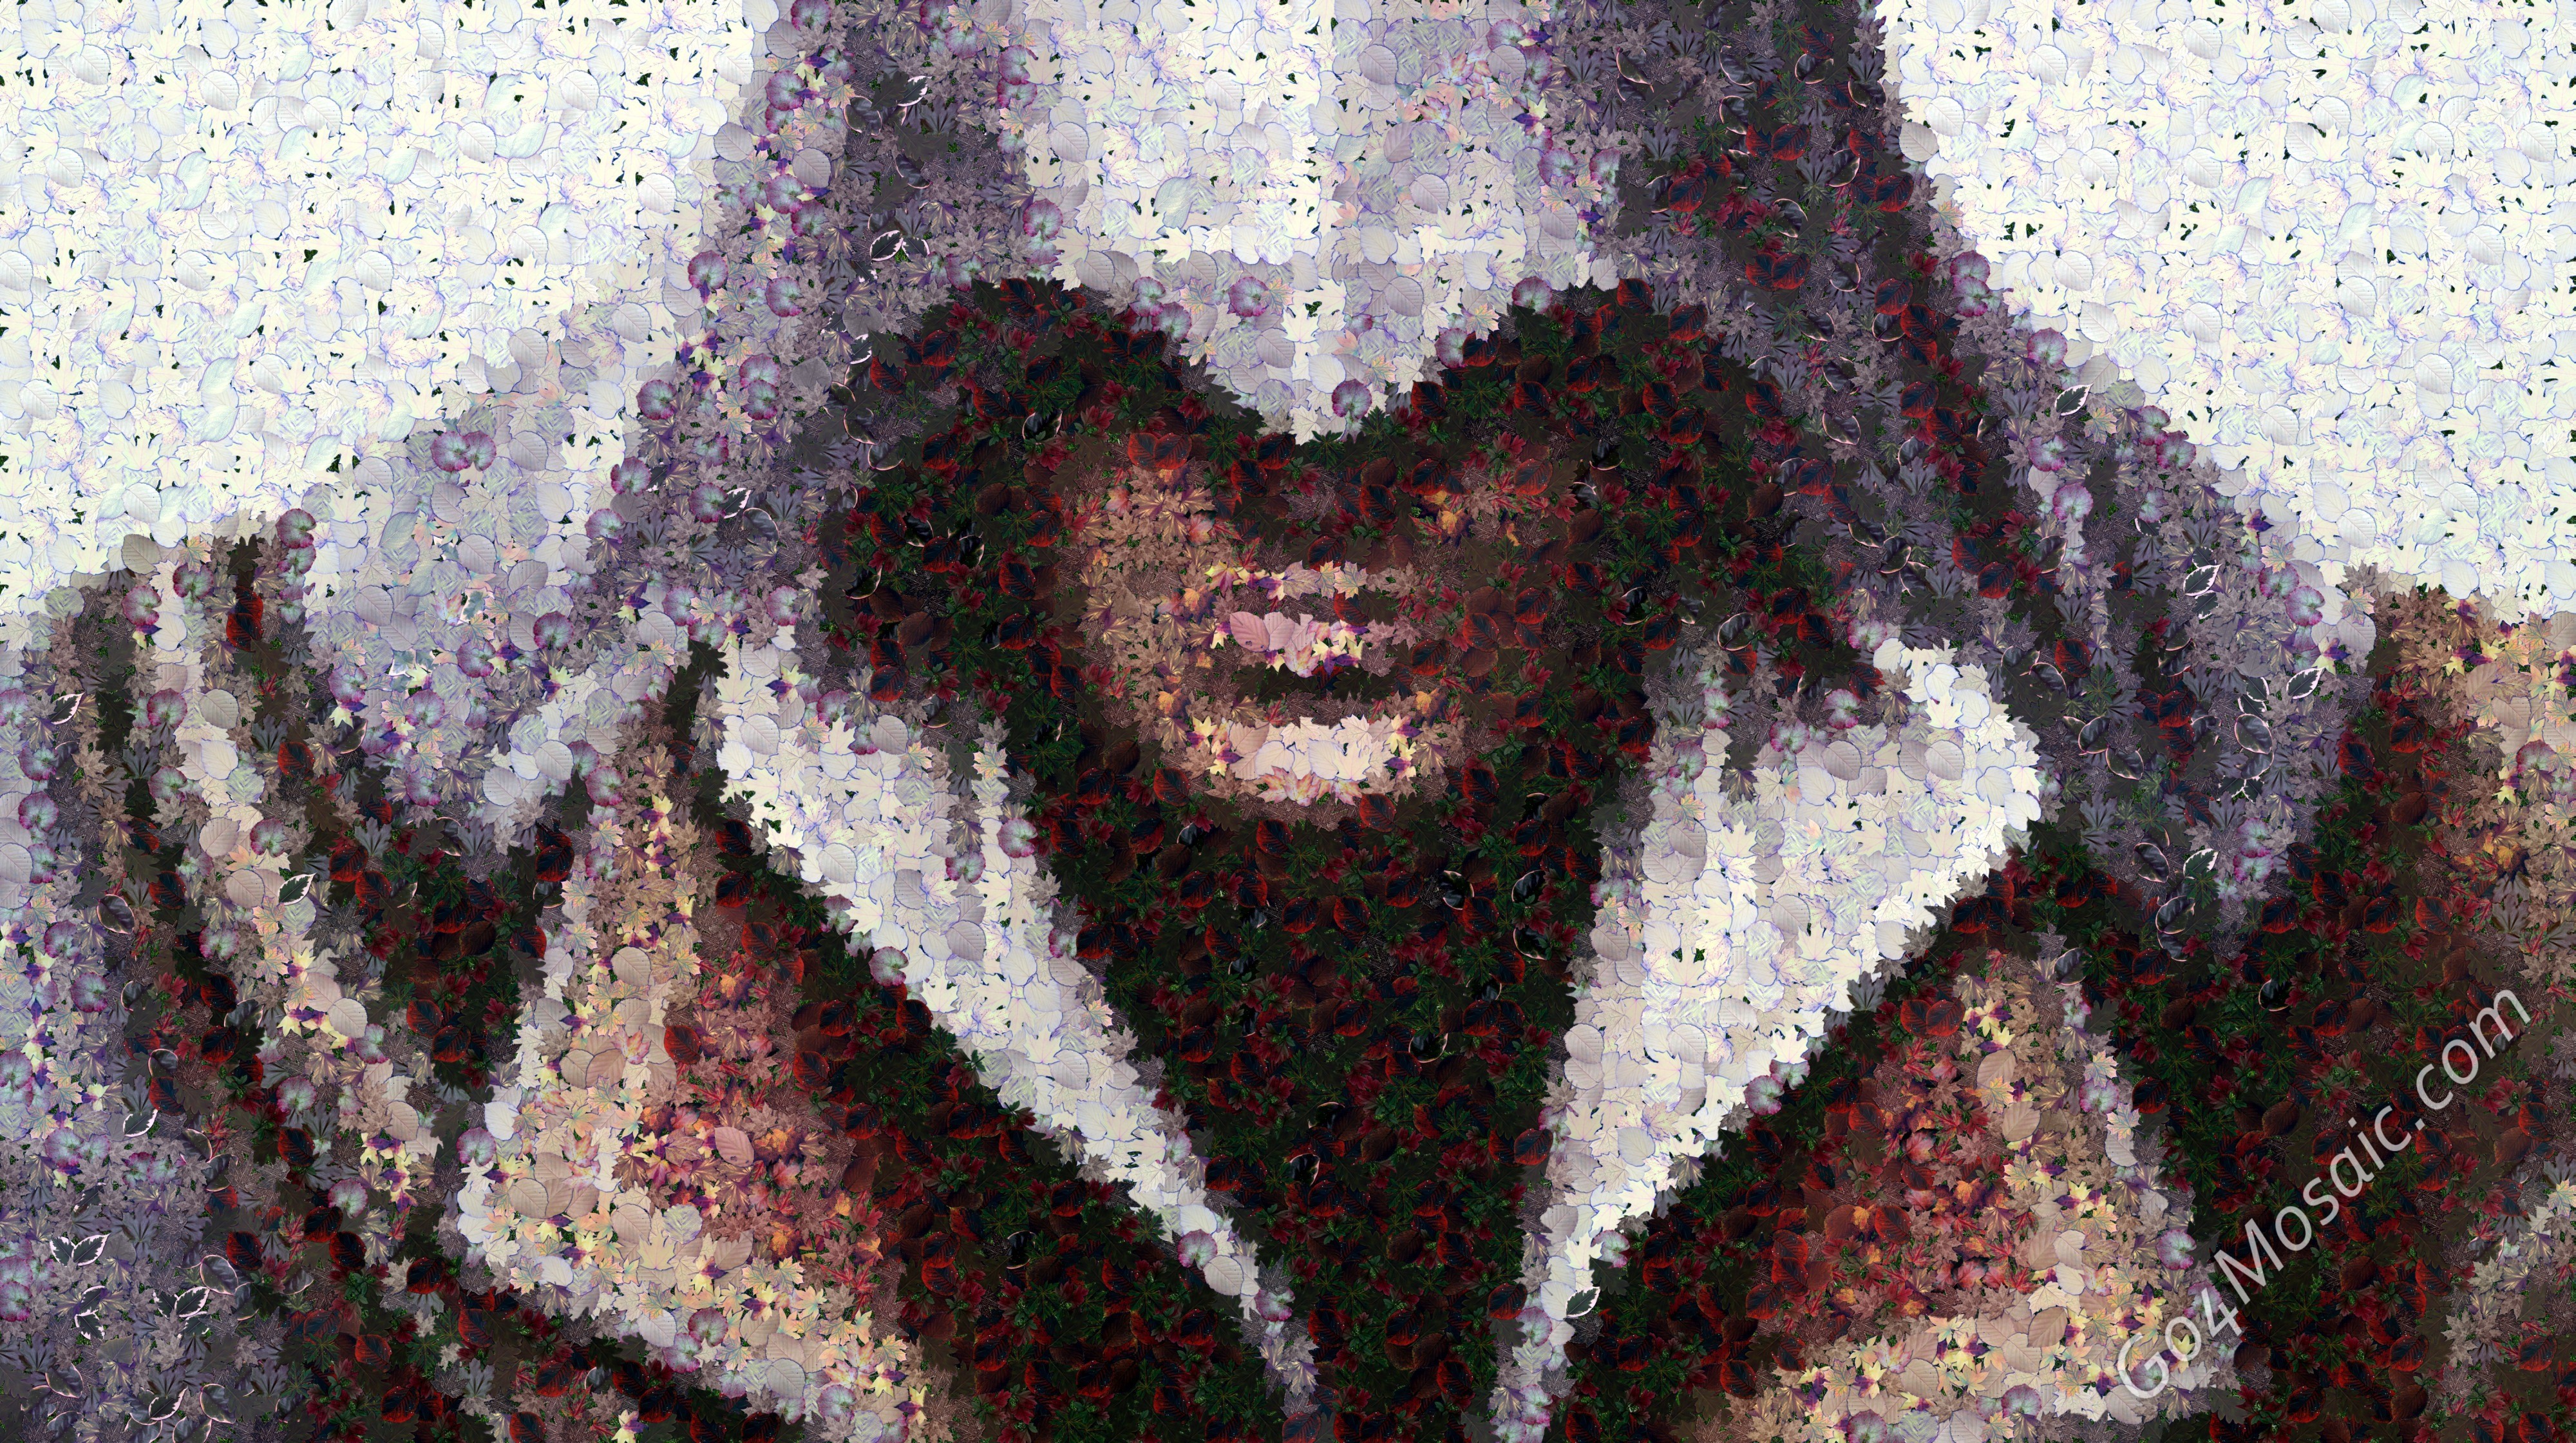 Ezio Auditore from Leaves